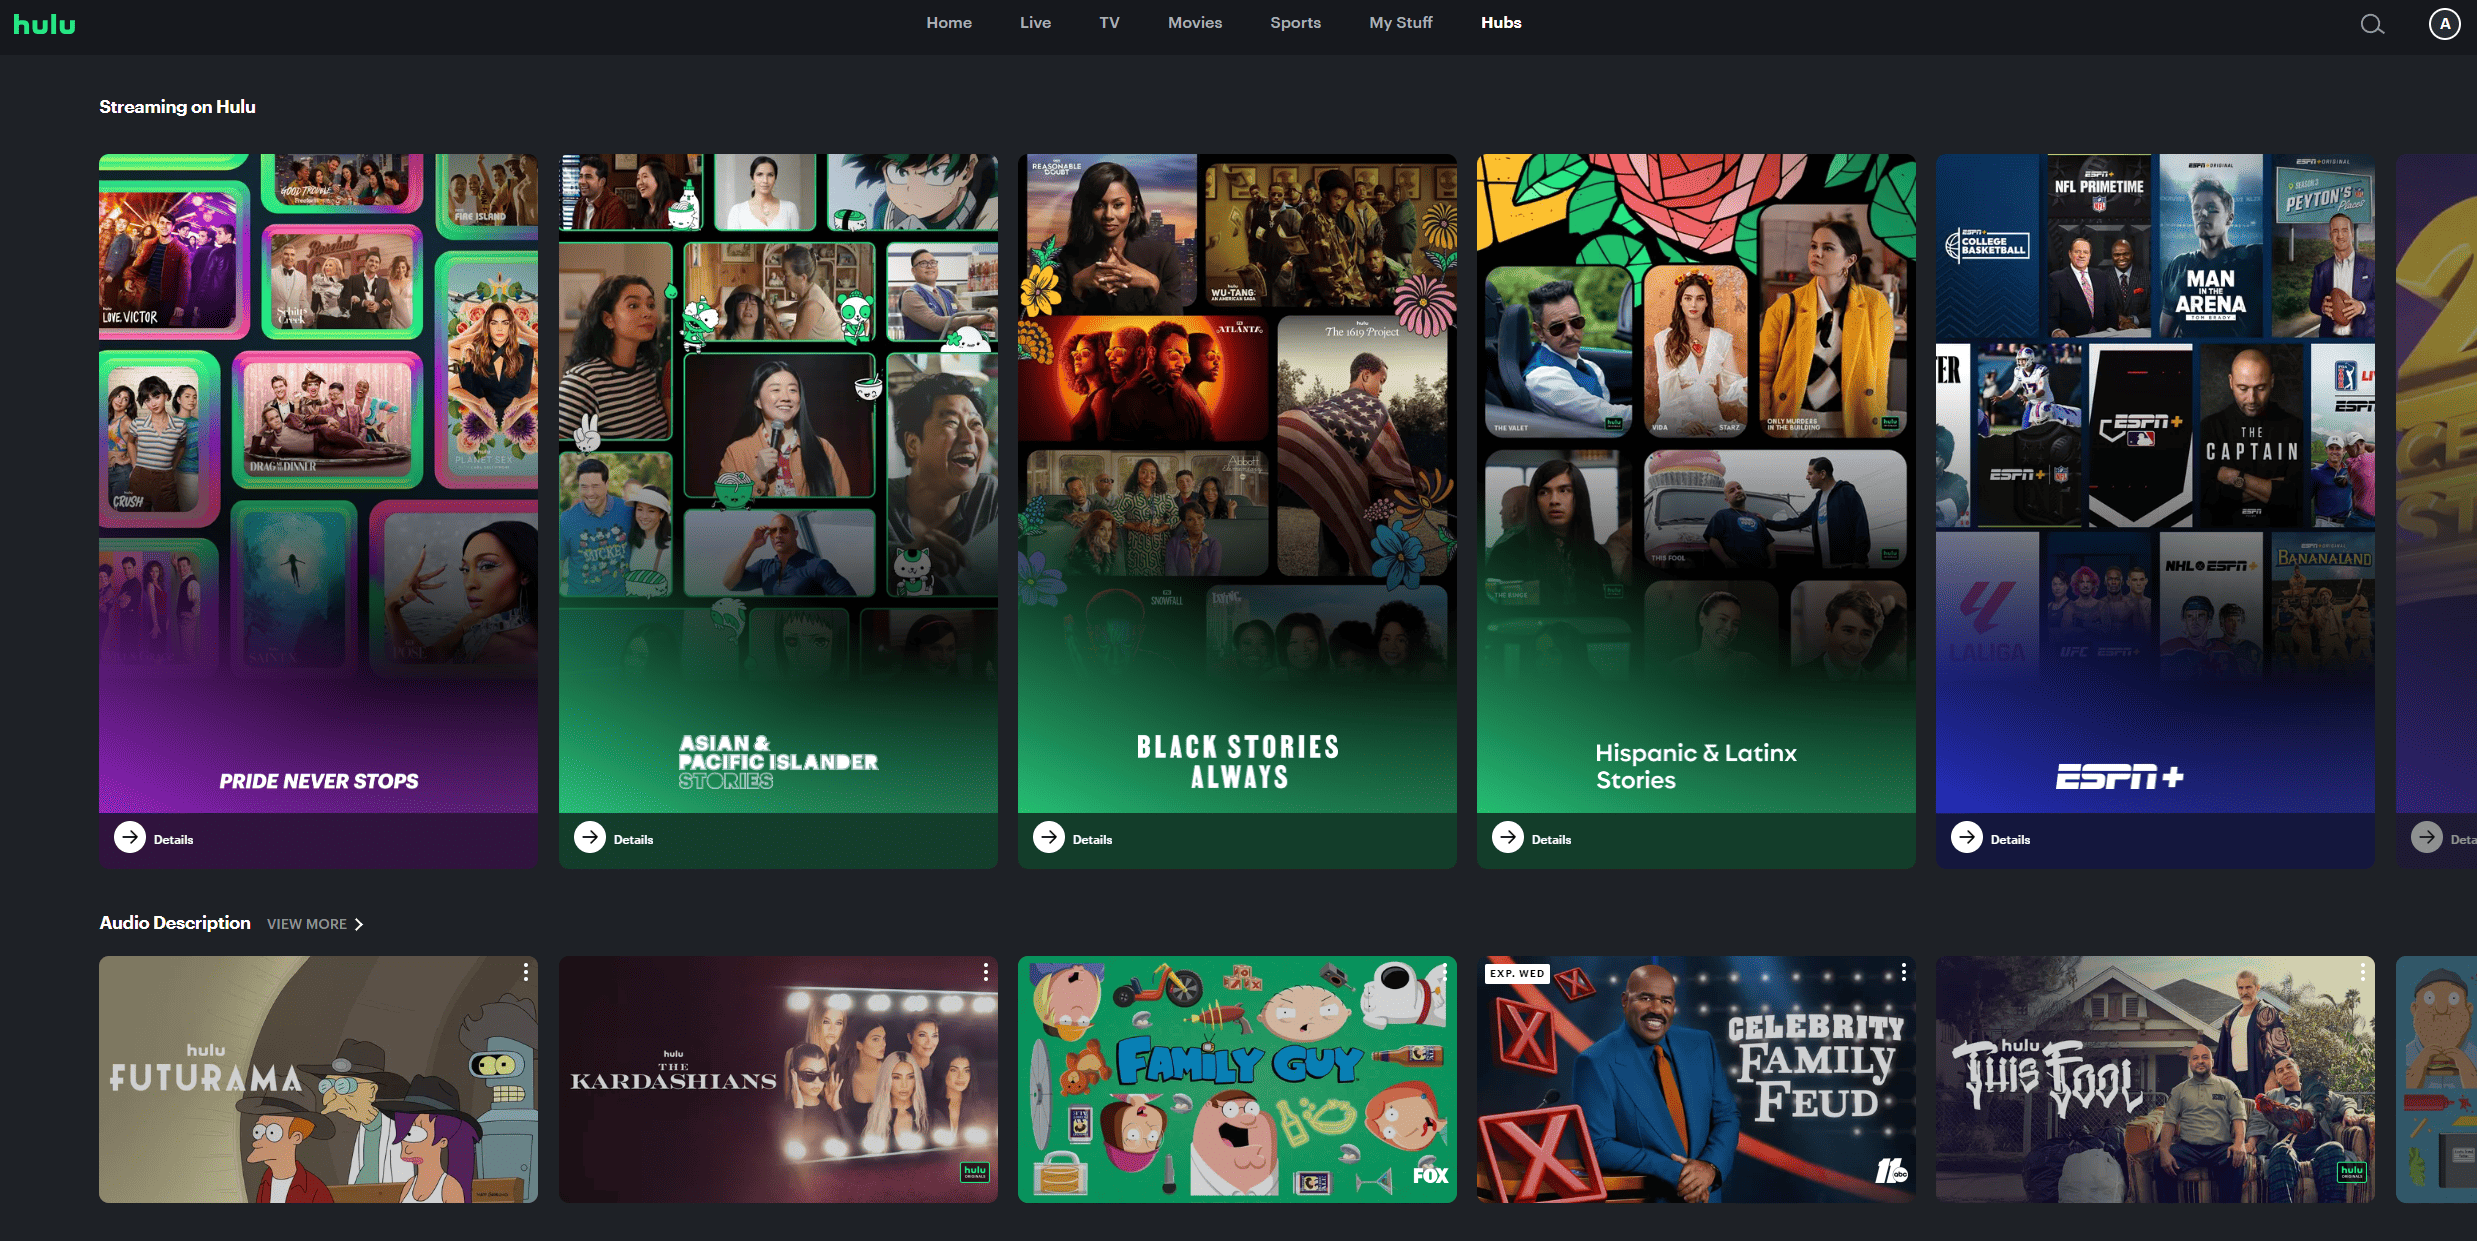 Screenshot of the “Hubs” tab on Hulu showing categories of different shows, movies, and sports